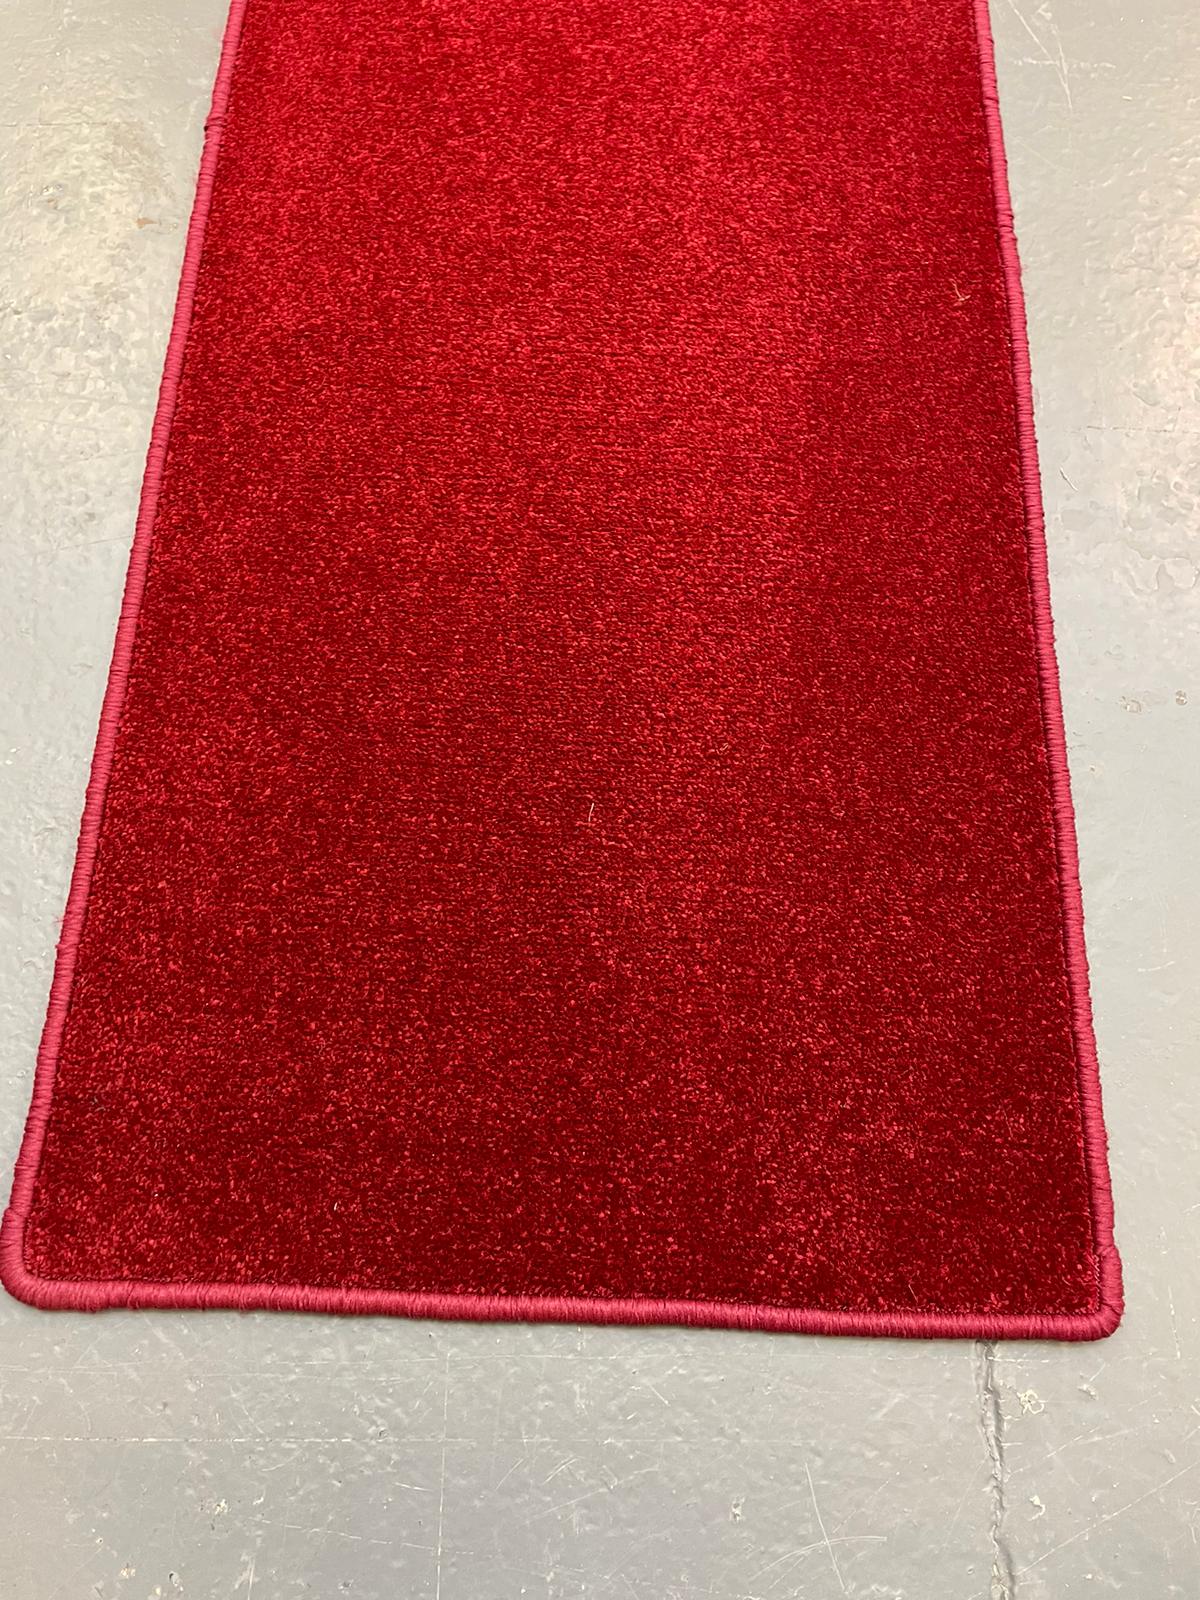 Royal red carpet runner rug, very high quality, hand-made carpet, stain resistant